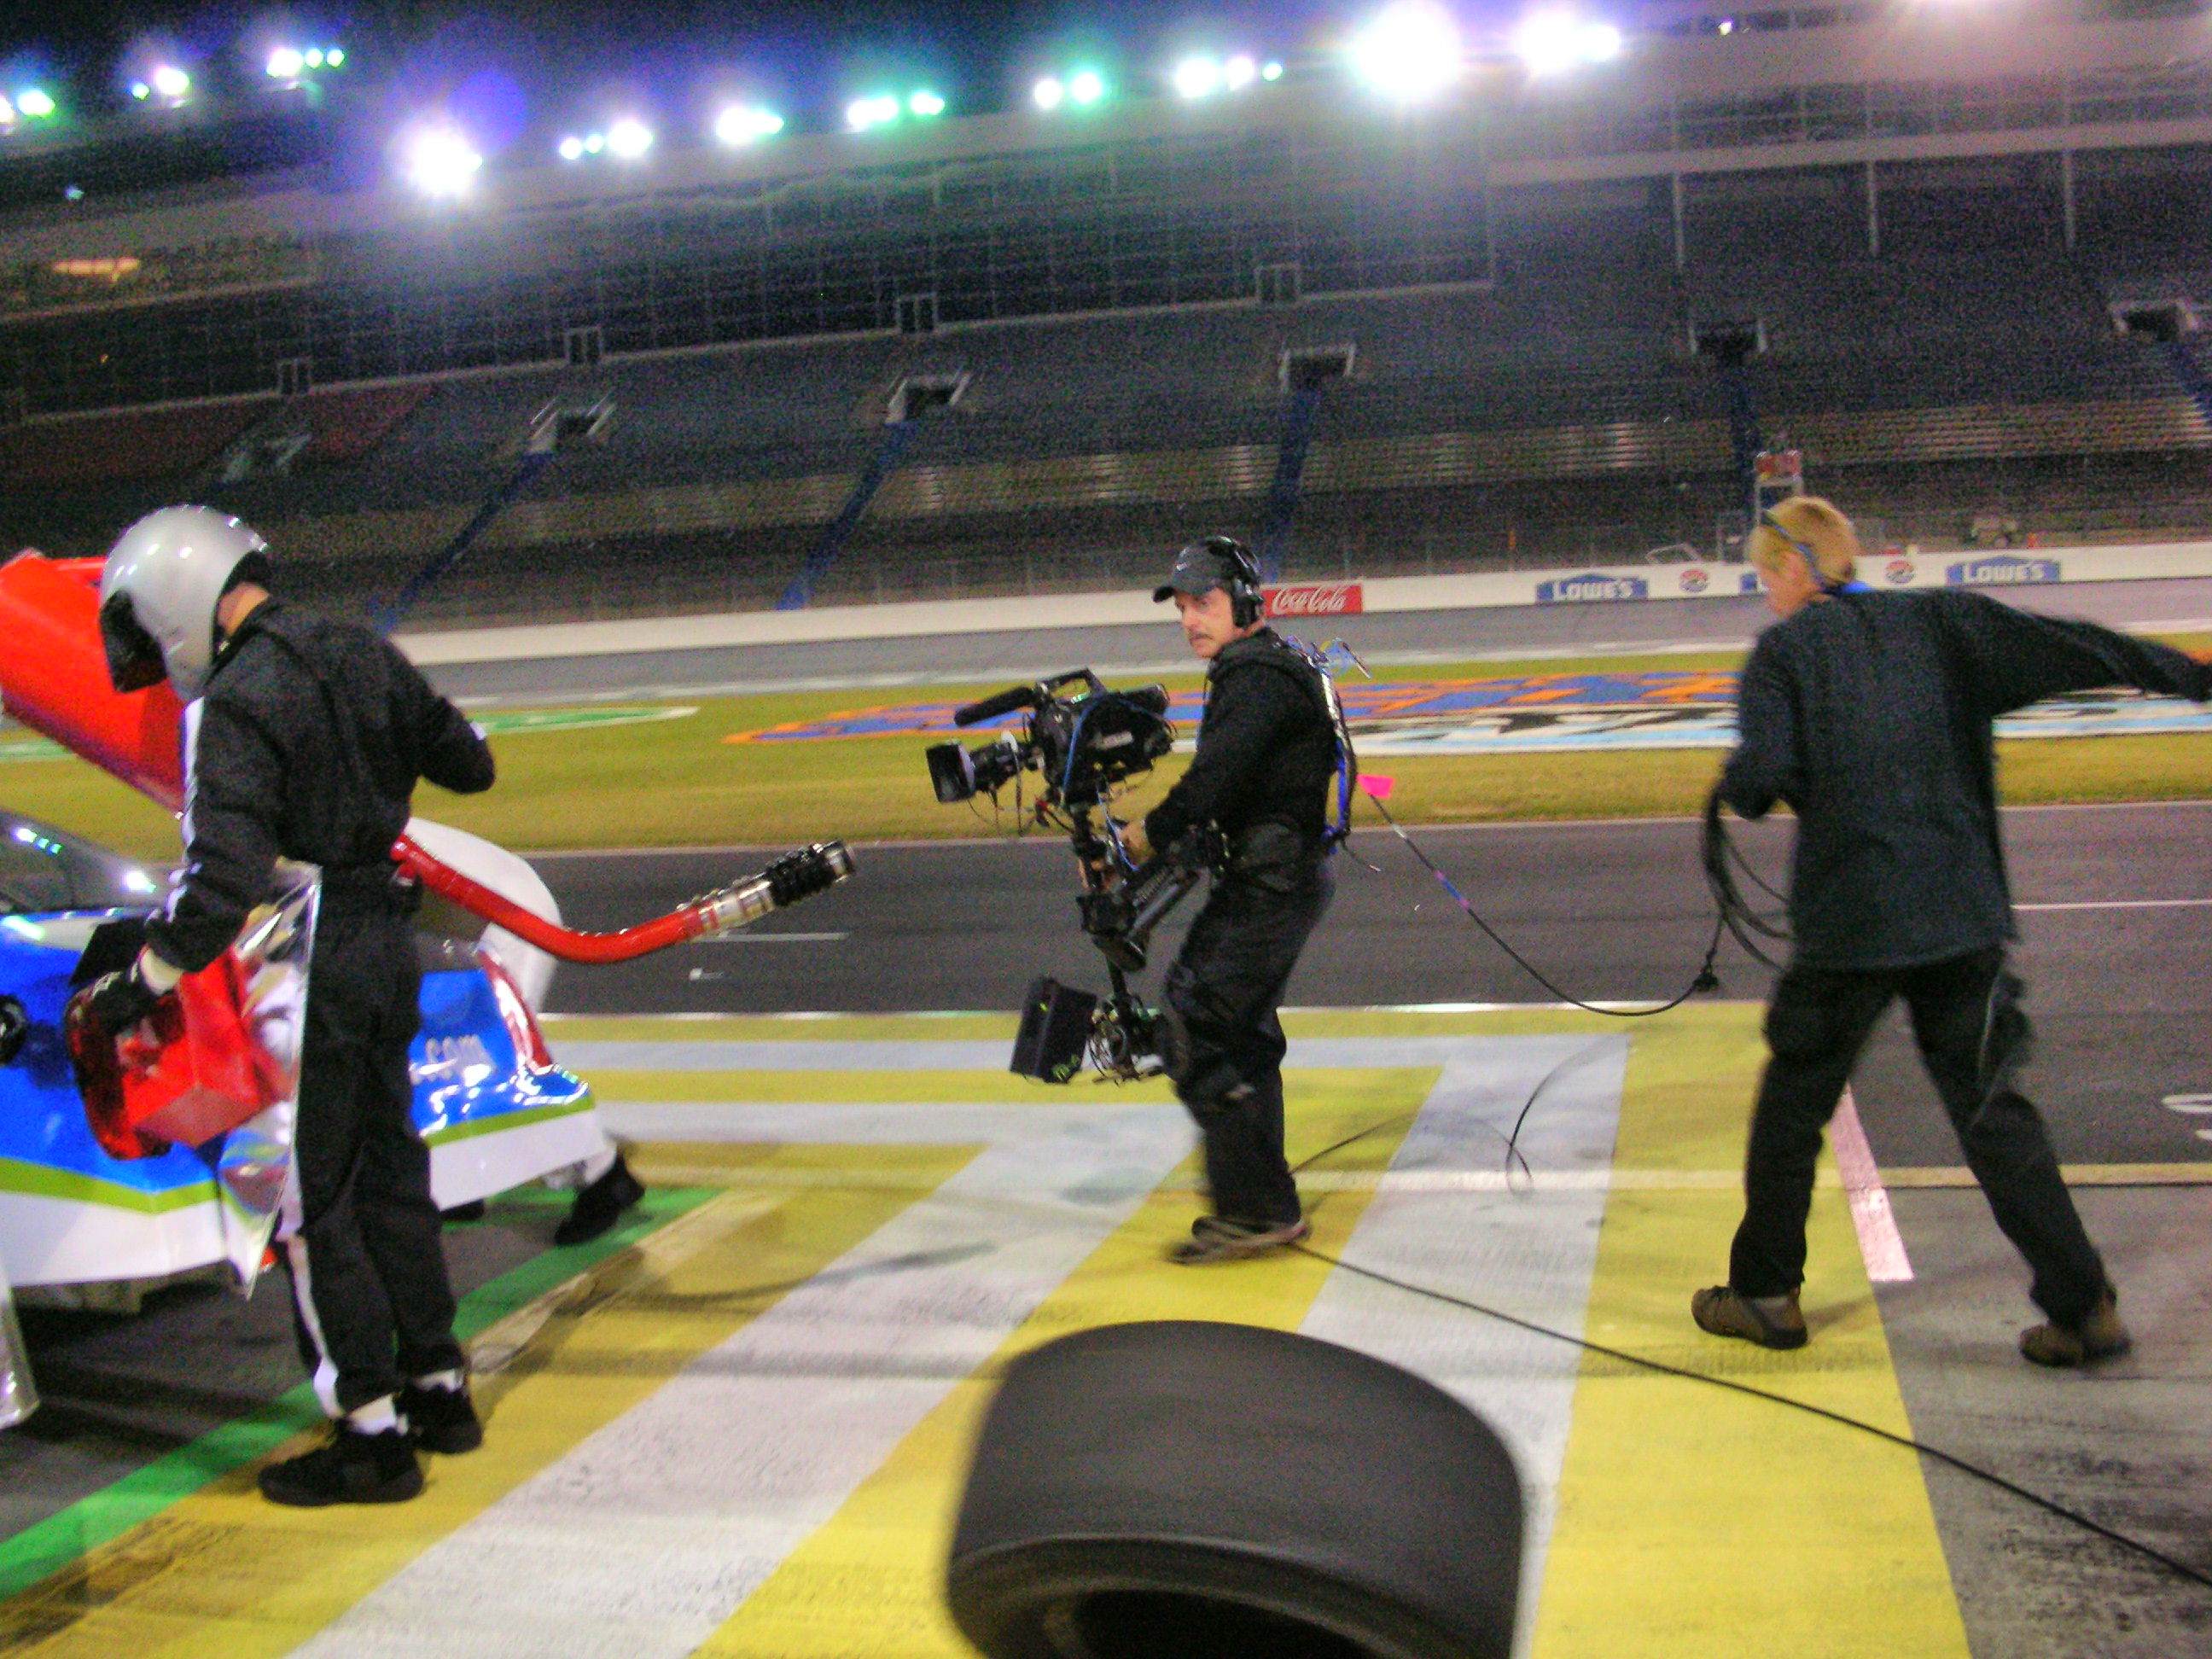 Fast Cars Super Stars(ABC) Pit Action. Watch that tire Scotty!